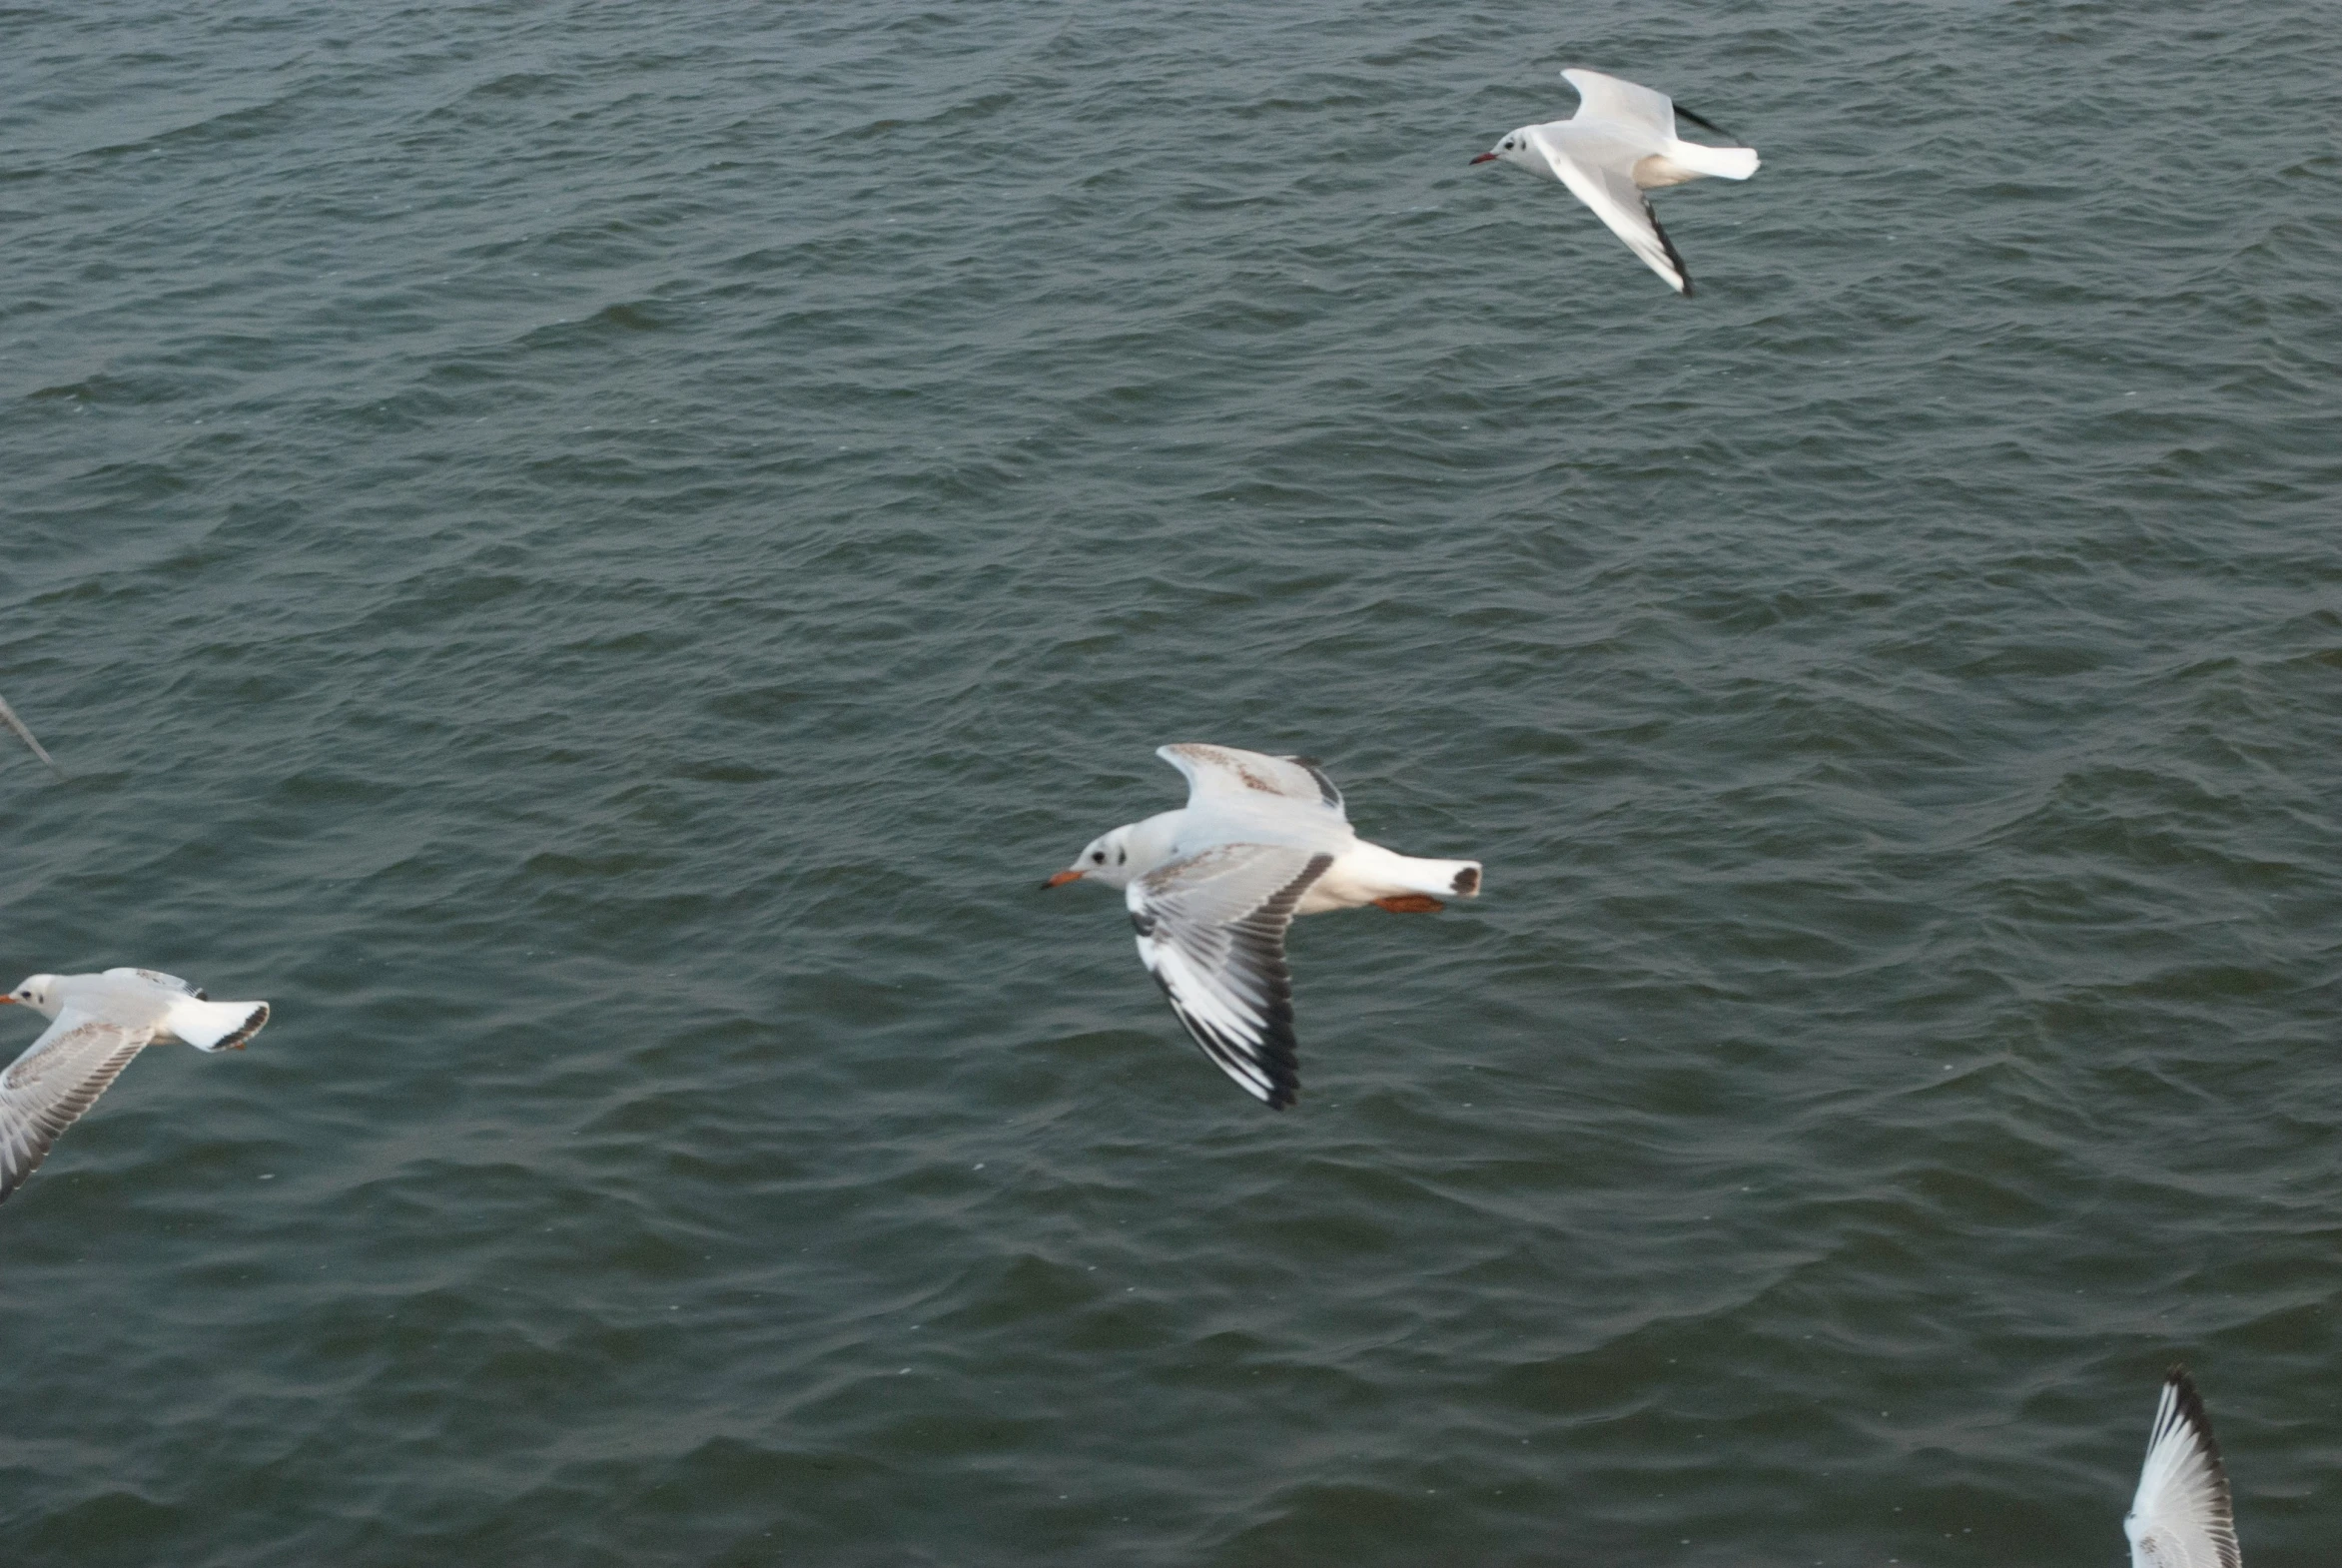 seagulls flying low over the ocean on the water